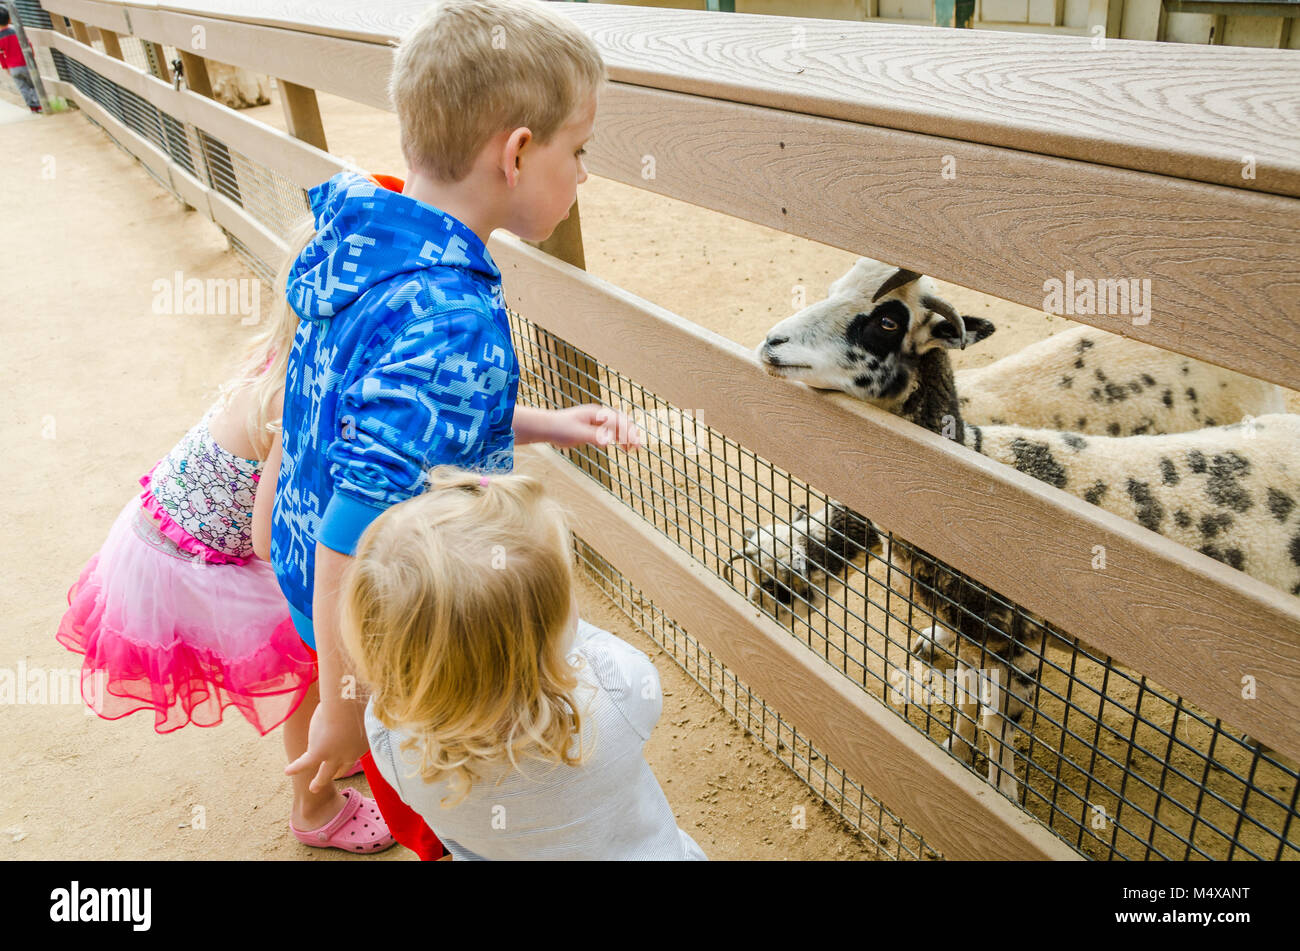 Children face a goat in a petting zoo at the Orange County Zoo. Stock Photo